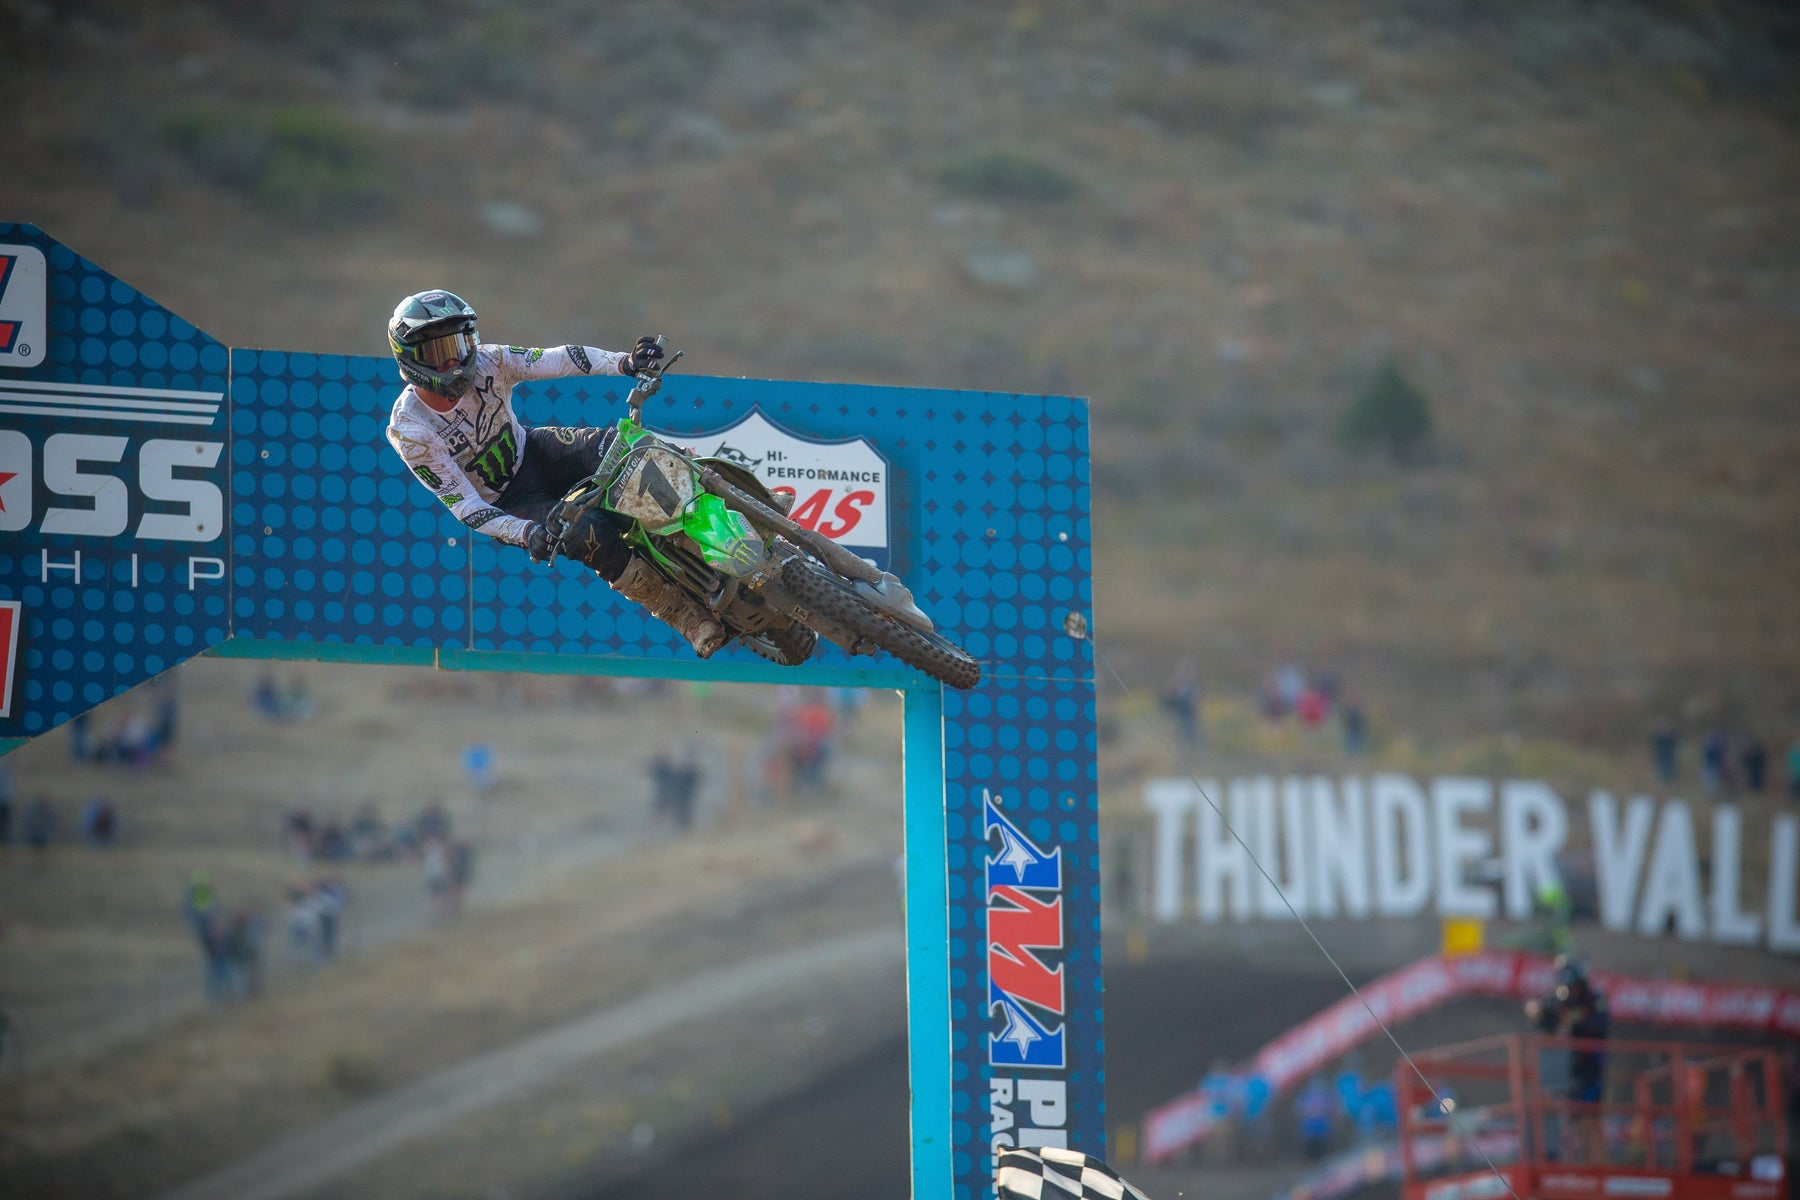 ELI TOMAC BRINGS ON THE NOISE TO TAKE OVERALL 450 MX WIN AT THUNDER VALLEY NATIONAL, COLORADO